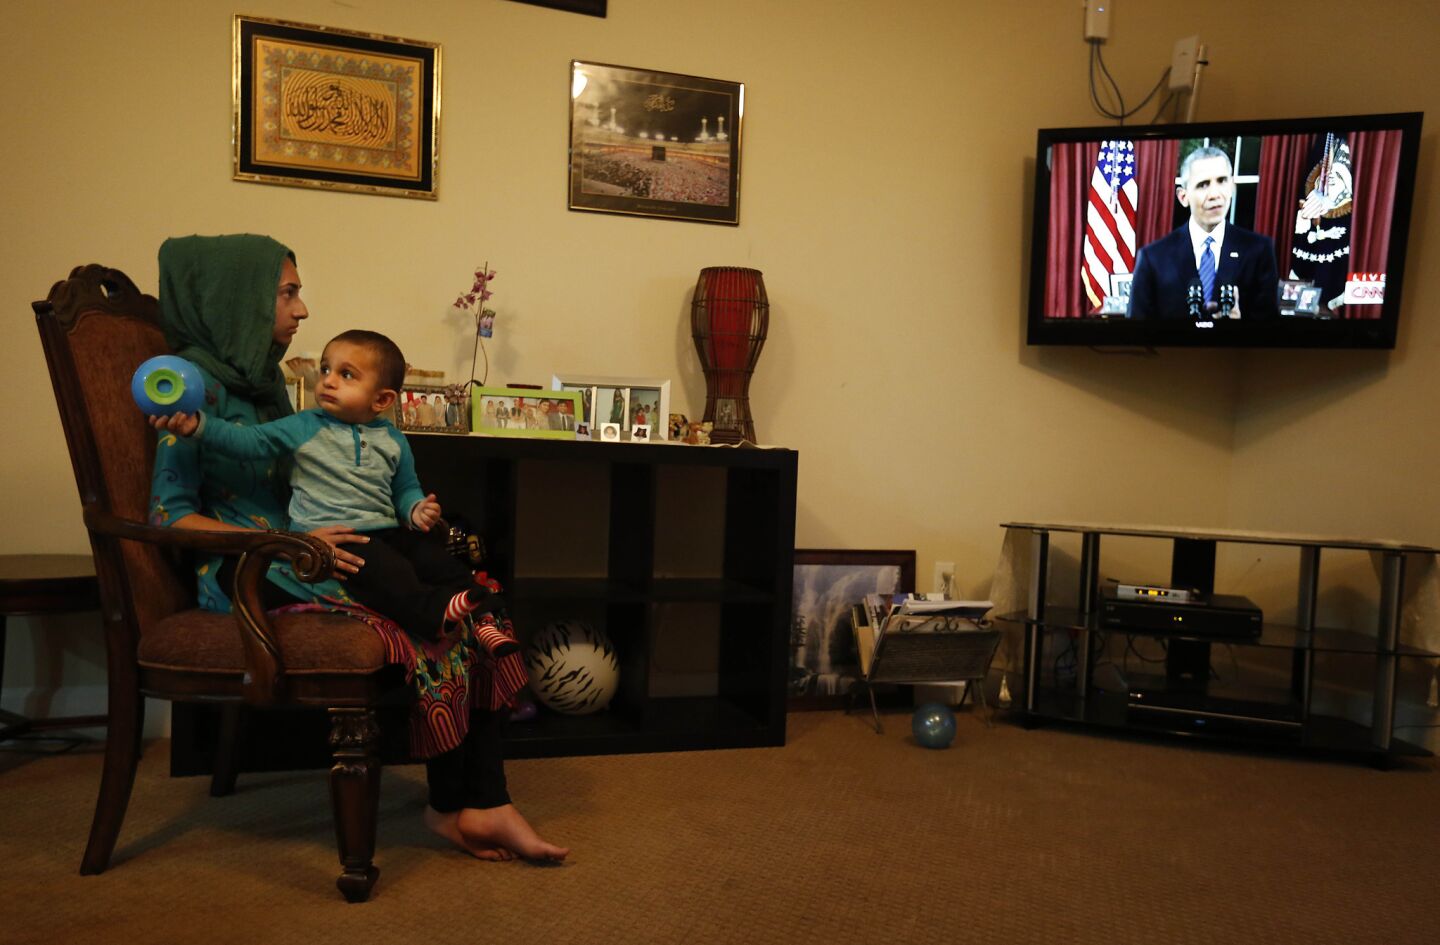 The Zafarullah family of Chino, originally of Pakistan, watches Obama's address. Arshia, at left, is holding her 18-month-old nephew, Sohail Ahmed.